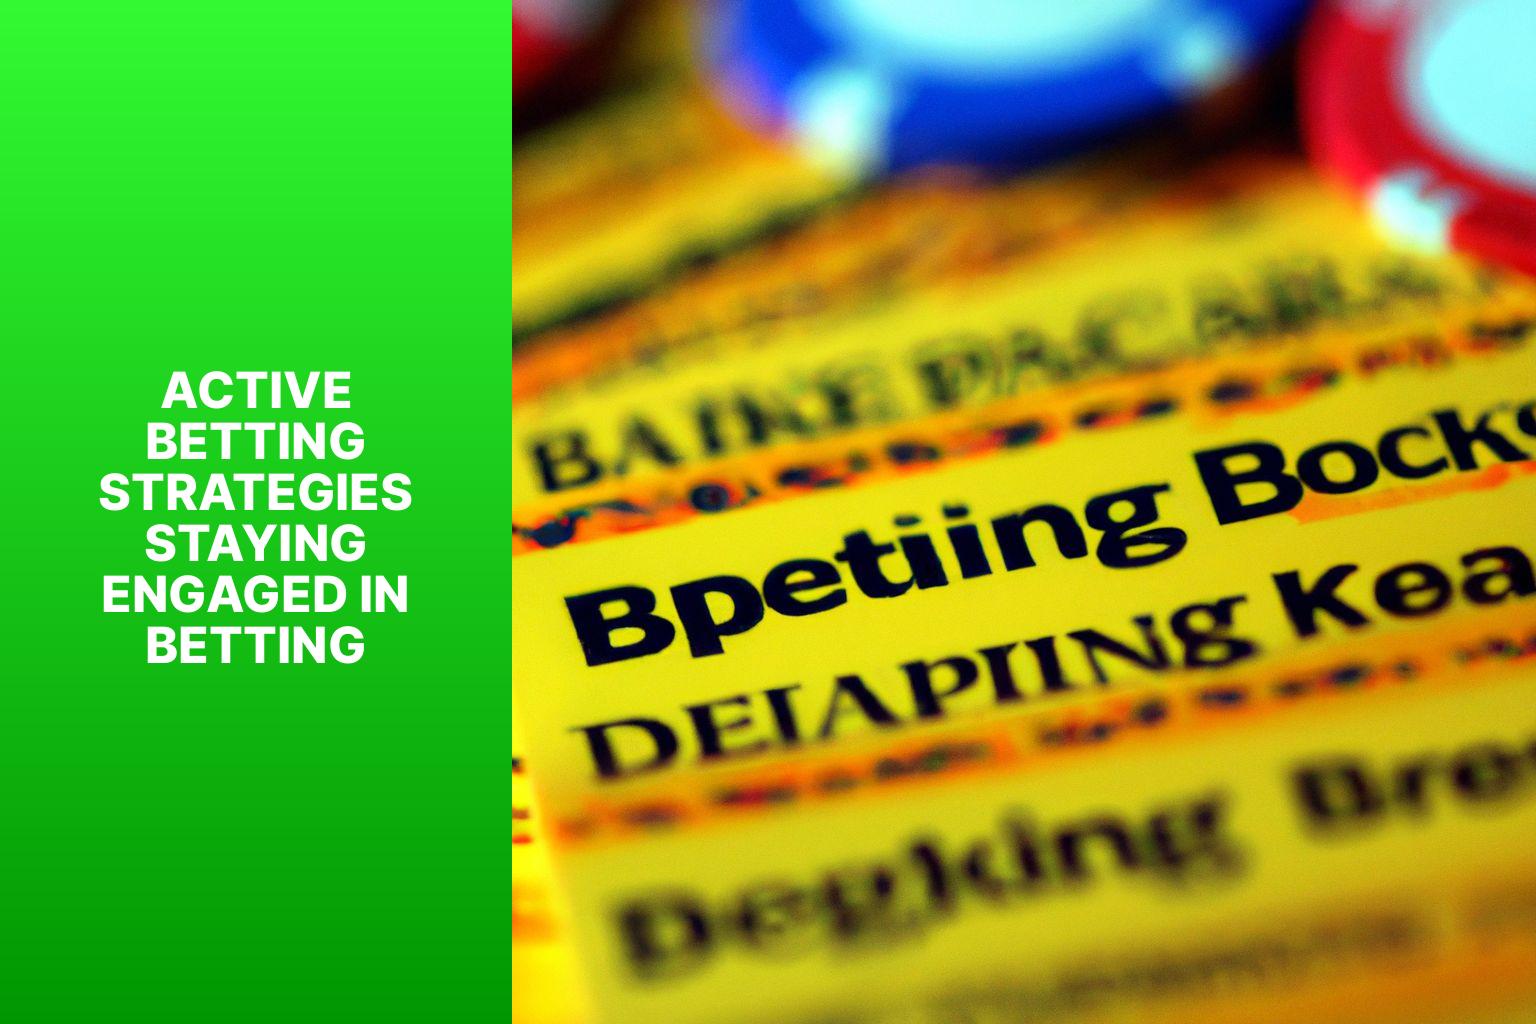 Active Betting Strategies Staying Engaged in Betting